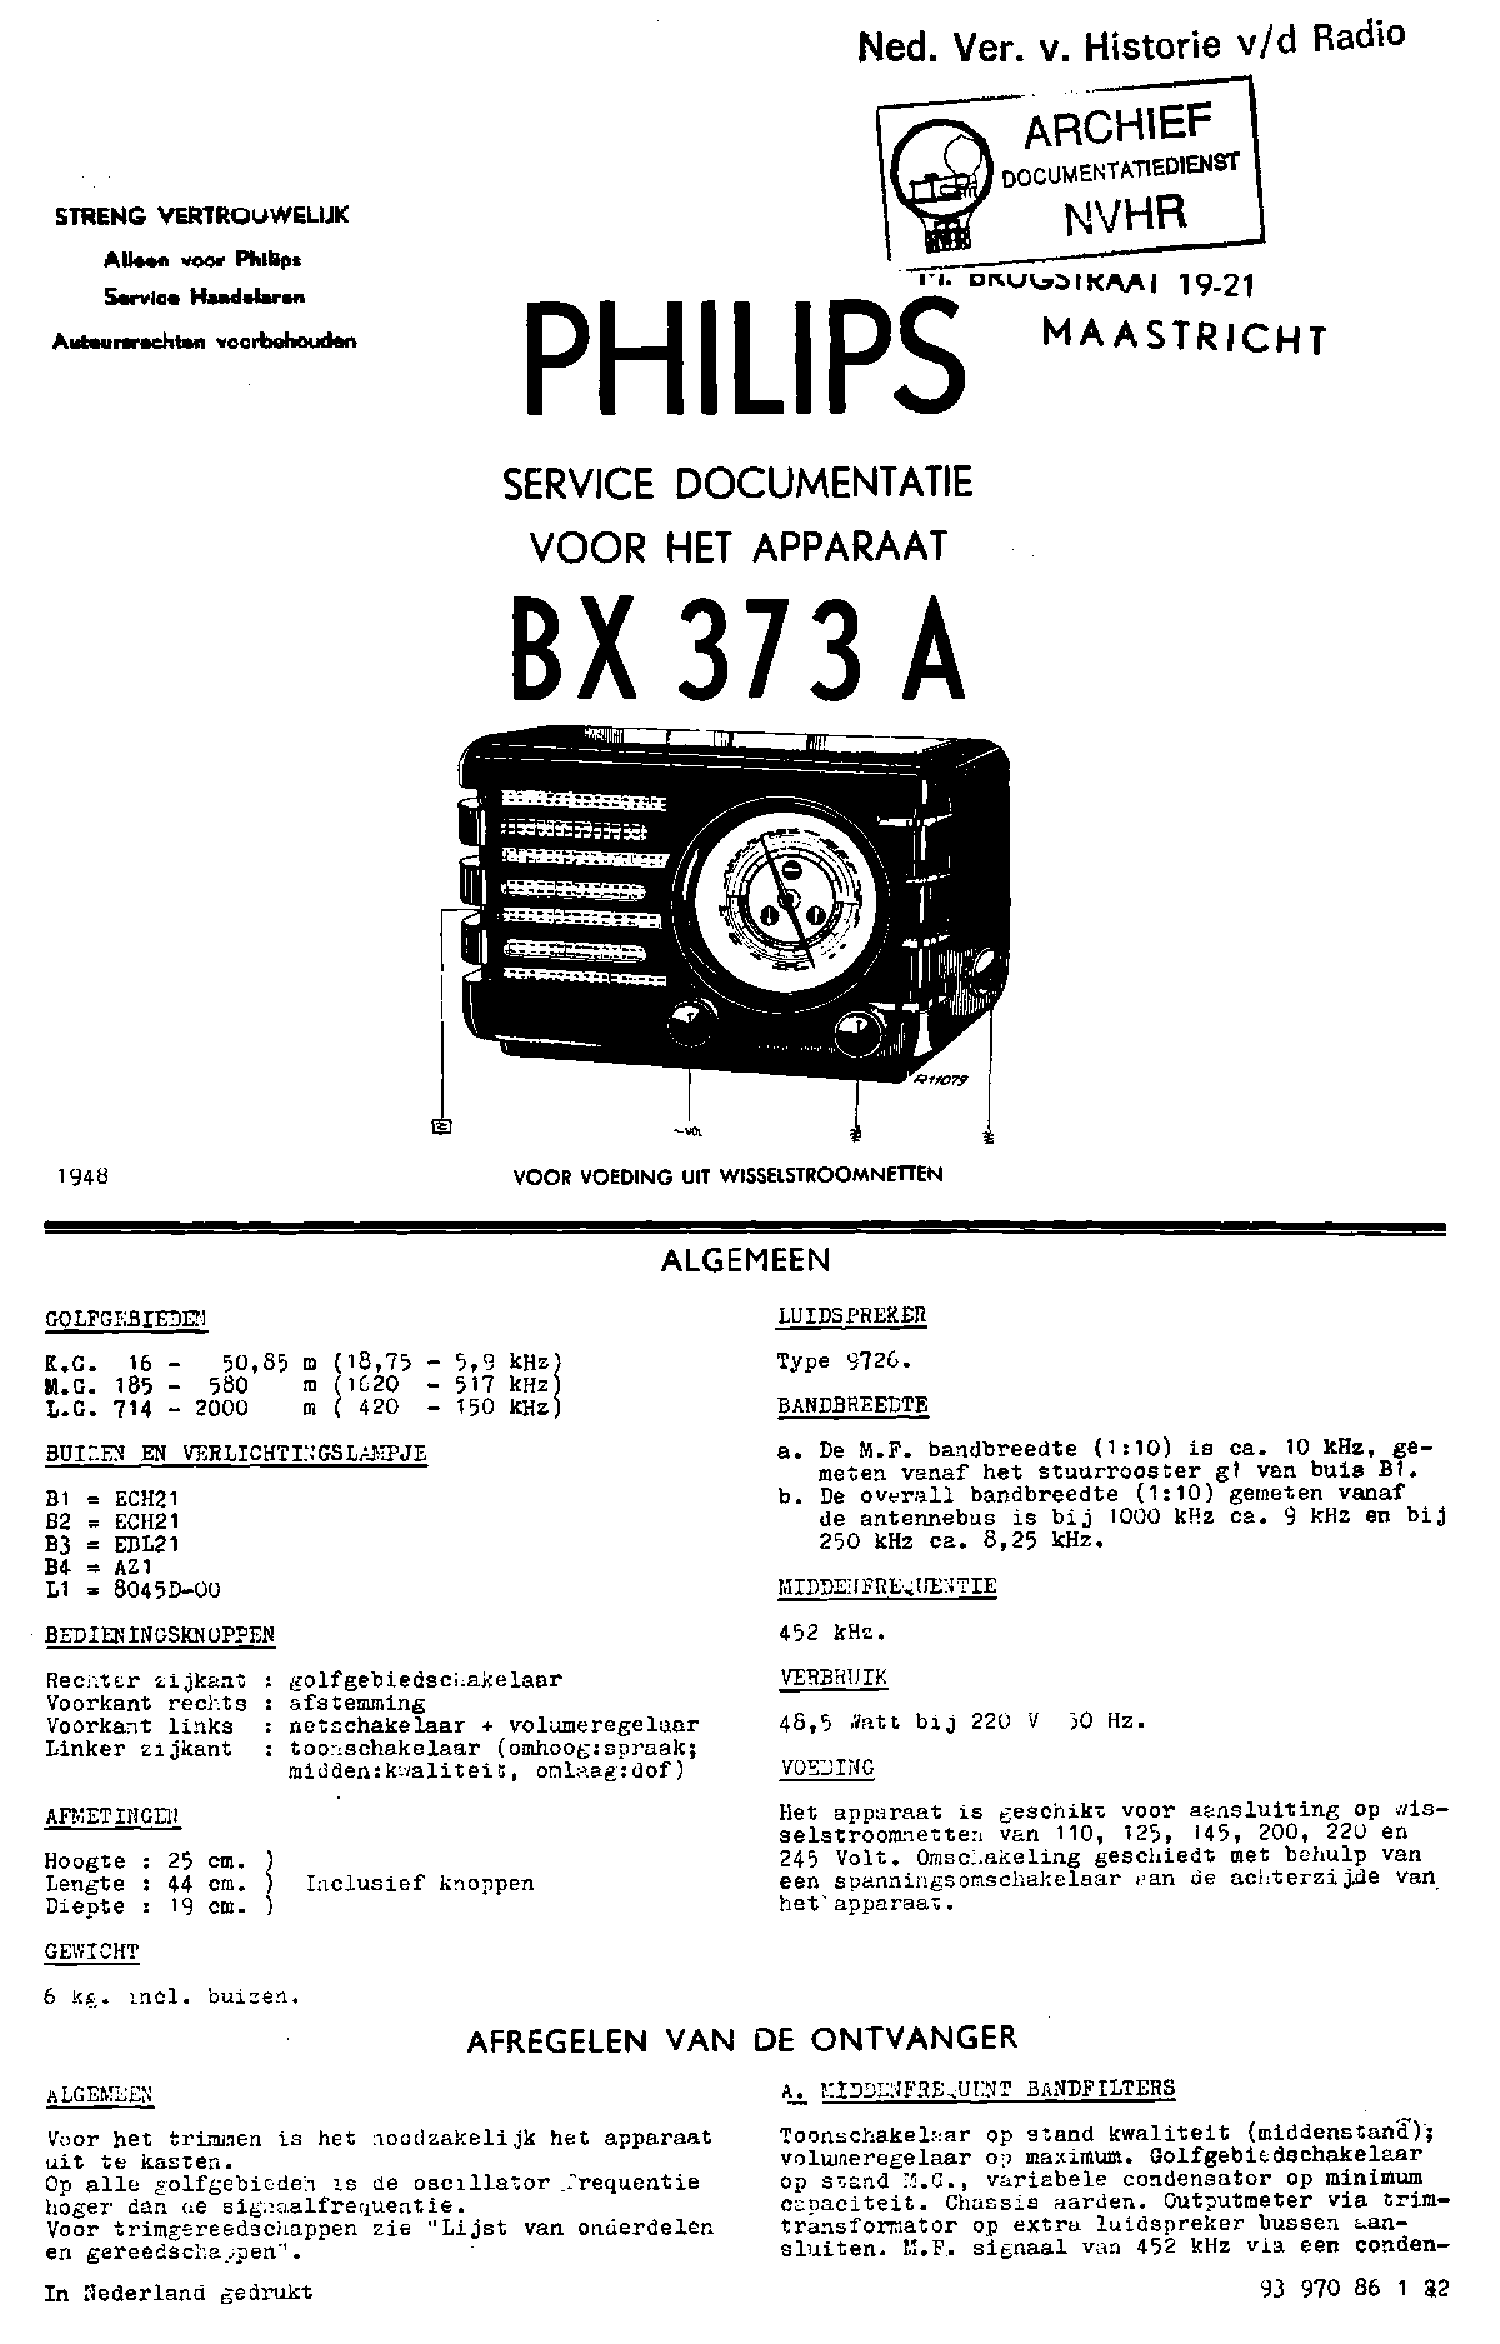 PHILIPS BX373A AC RECEIVER 1948 SM service manual (1st page)